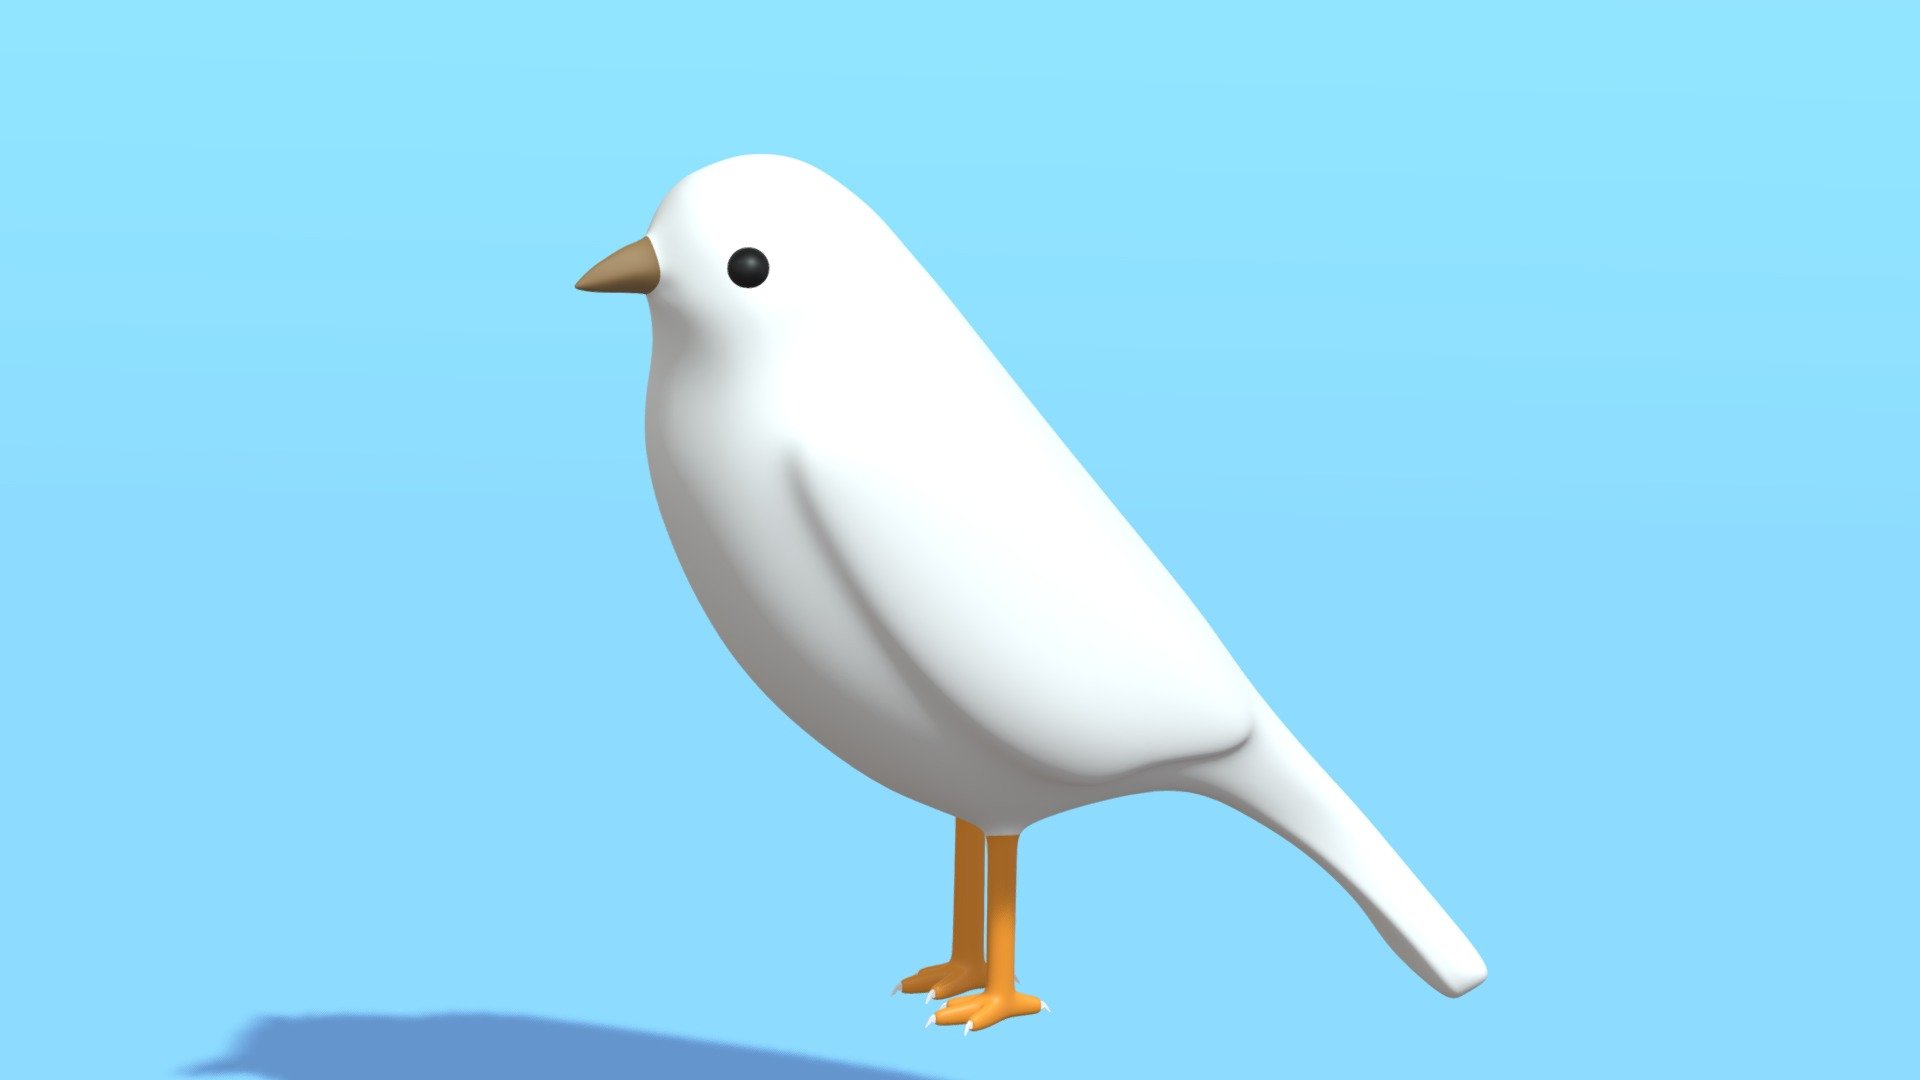 -Cartoon Cute Bird Sparrow.

-1 Model contains 1 object.

-Subdivision Level 3 : Verts : 59,654 Faces : 59,648.

-Subdivision Level 2 : Verts : 14,918 Faces : 14,912.

-Subdivision Level 1 : Verts : 4,310 Faces : 4,304.

-Subdivision Level 0 Flat : Verts : 1,658 Faces : 1,652.

-Subdivision Level 0 Smooth : Verts : 1,658 Faces : 1,652.

-Materials and objects have the correct names.

-This product was created in Blender 2.8

-Formats: blend, fbx, obj, c4d, dae, abc, stl, glb,unitypackage.

-We hope you enjoy this model.

-Thank you 3d model